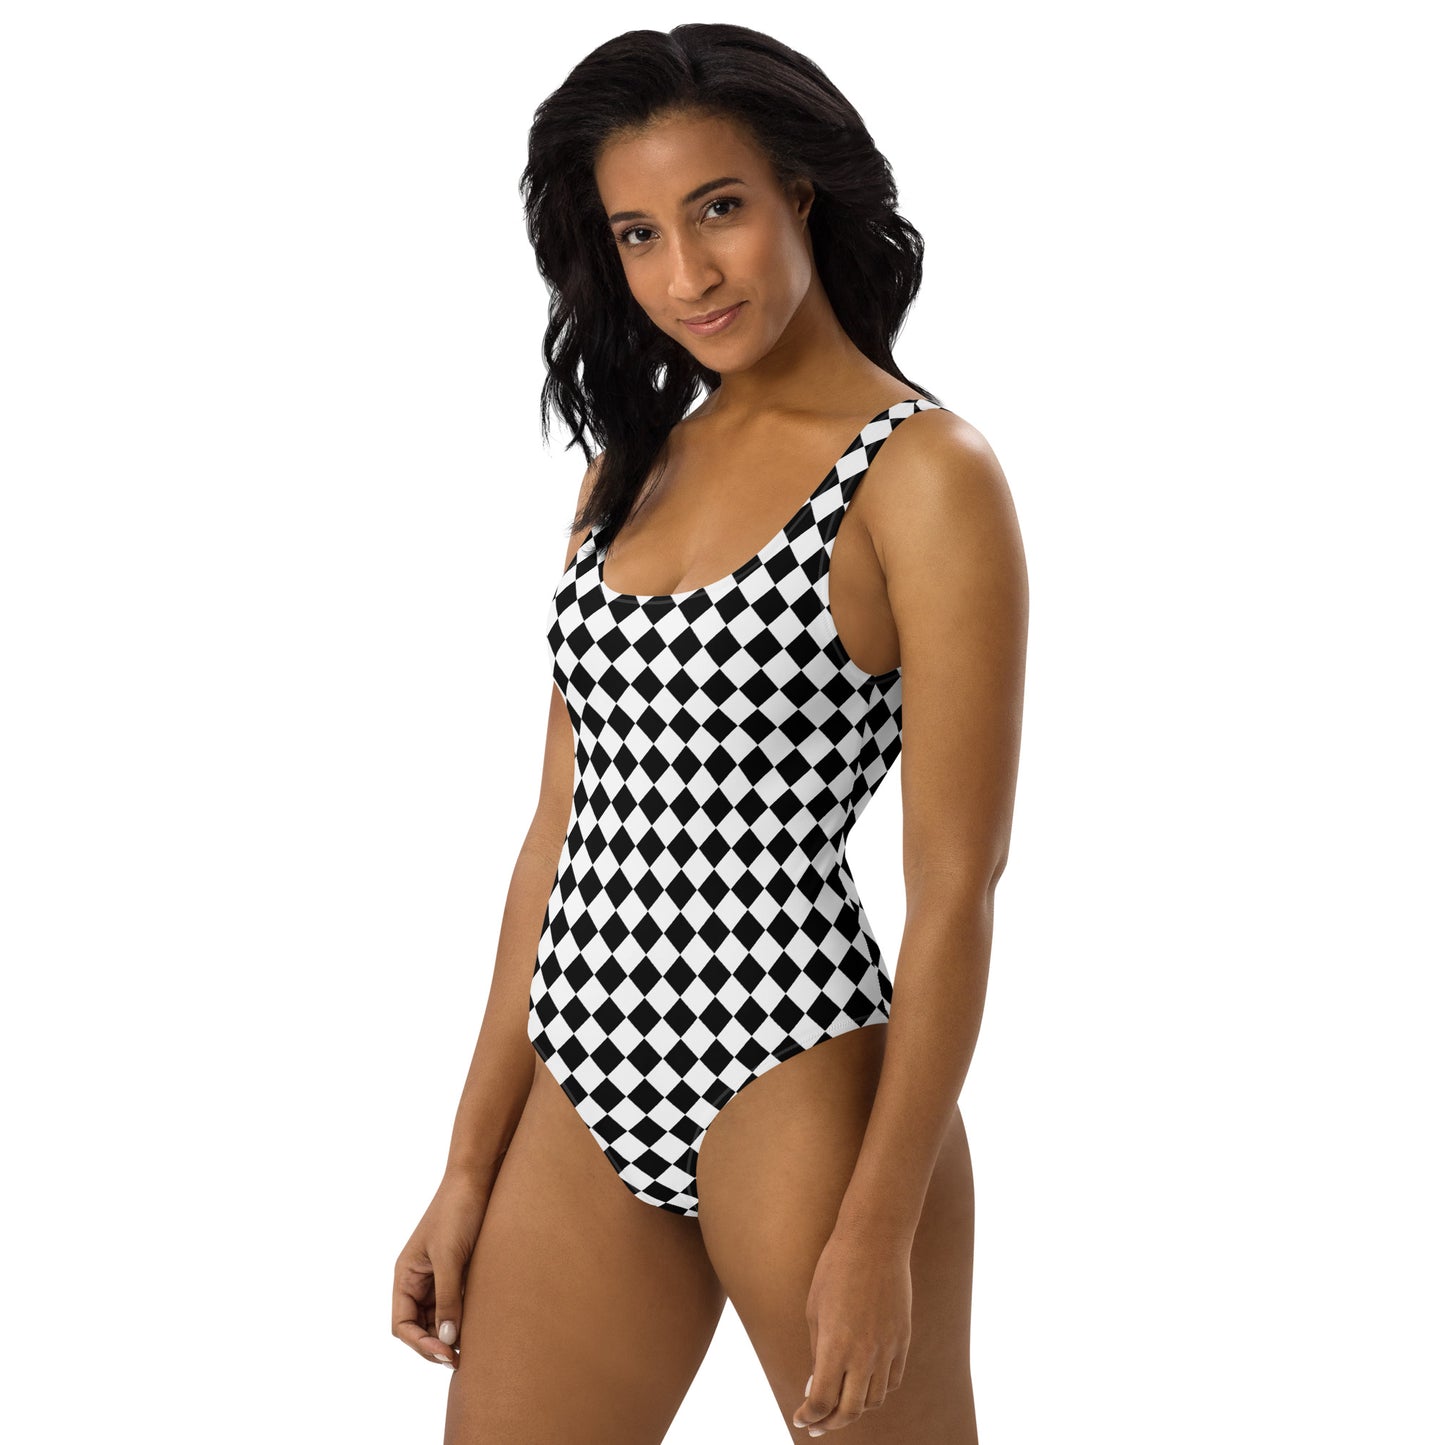 Woman with swimsuit with a print of a chessboard